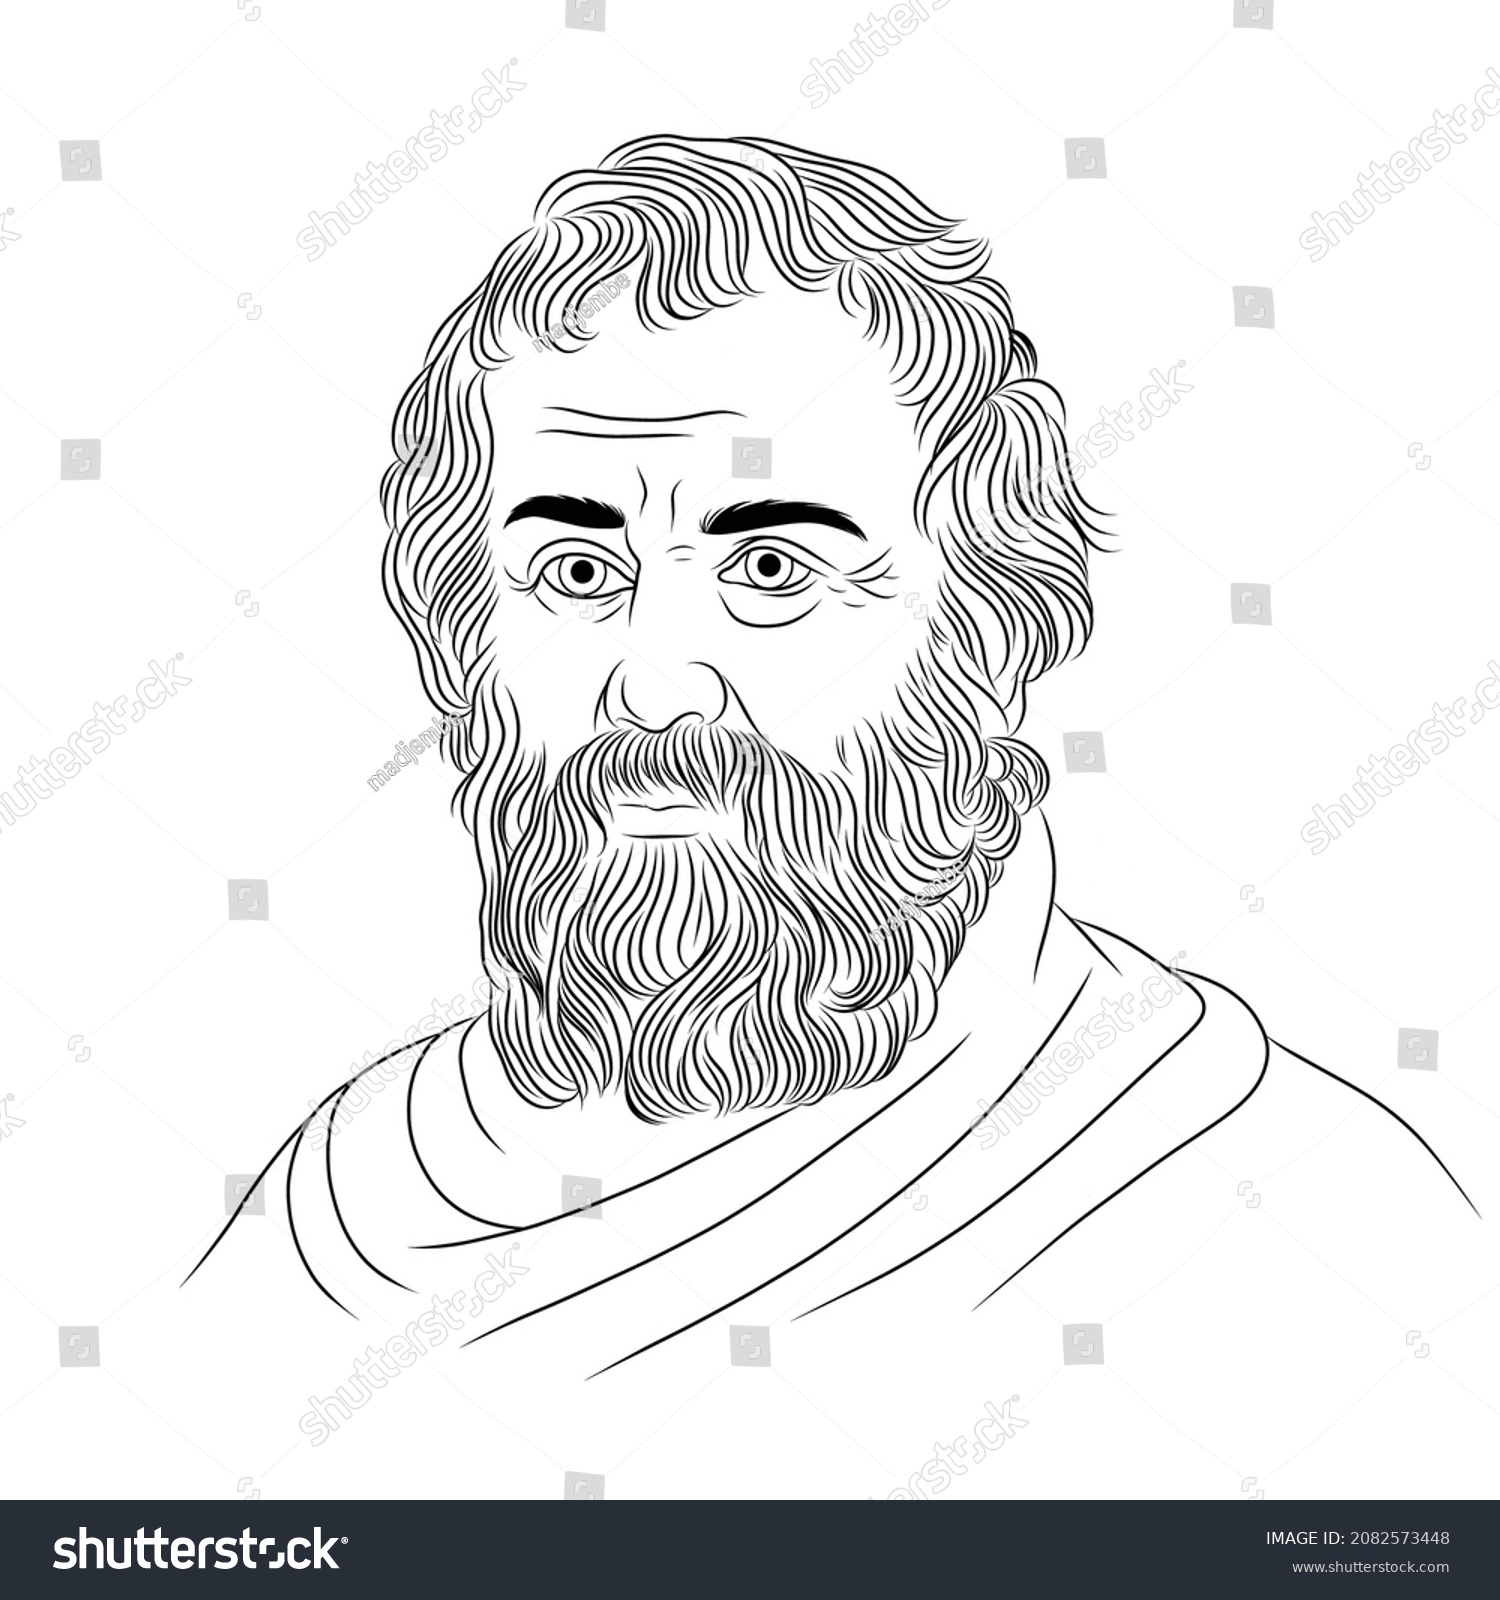 Archimedes Famous Vector Sketch Portrait Stock Vector (Royalty Free ...